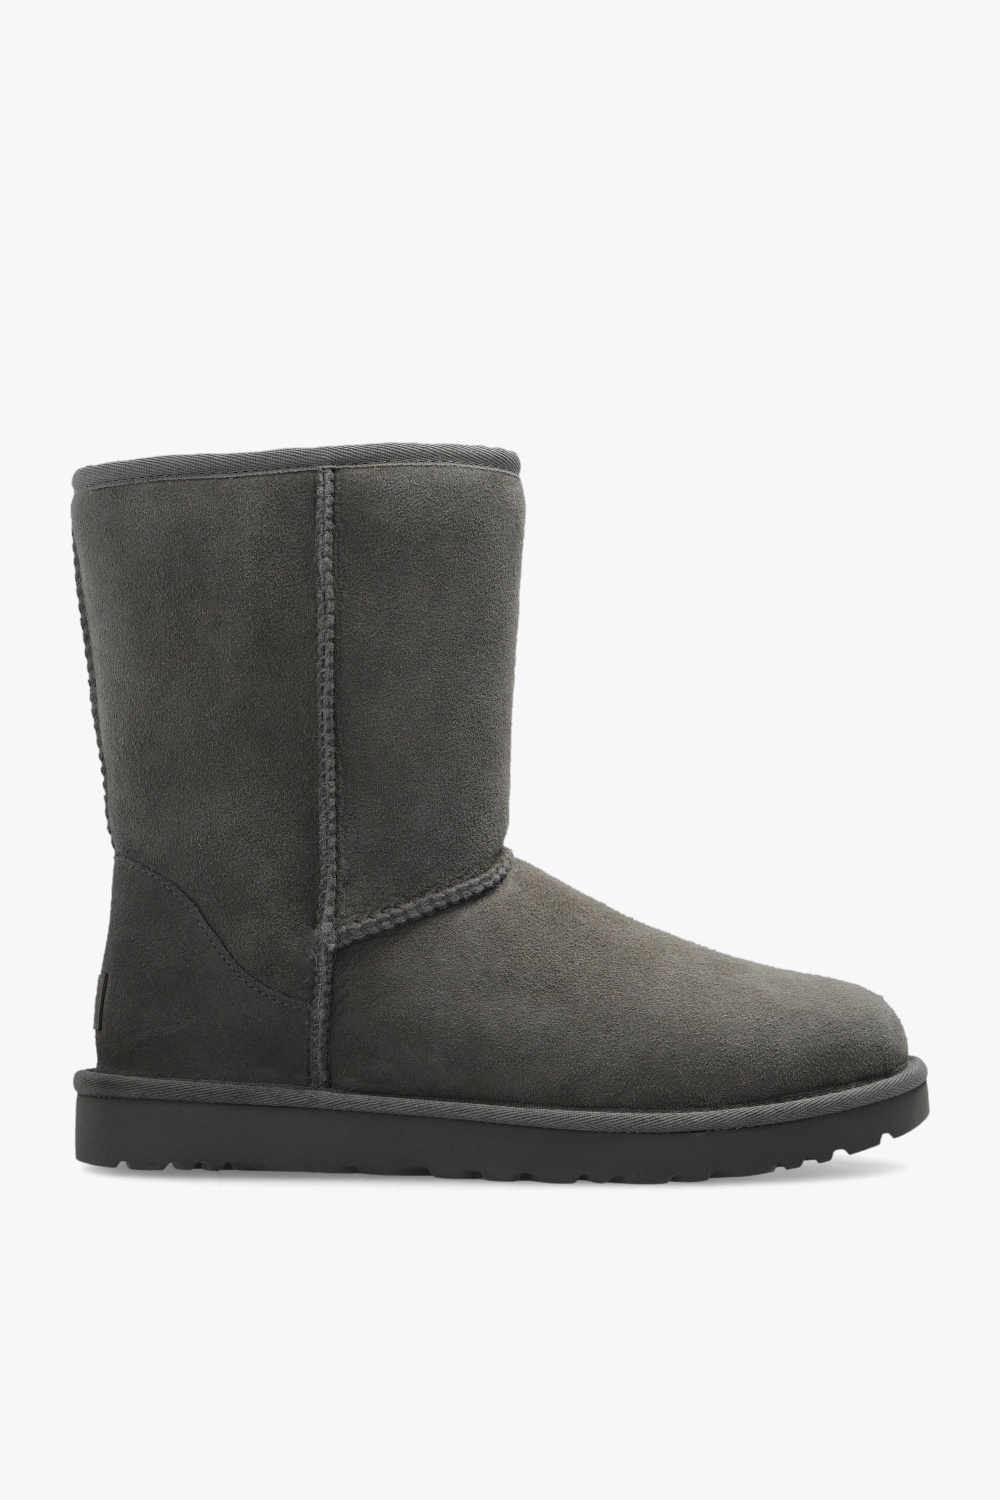 UGG ‘Classic Short’ snow boots